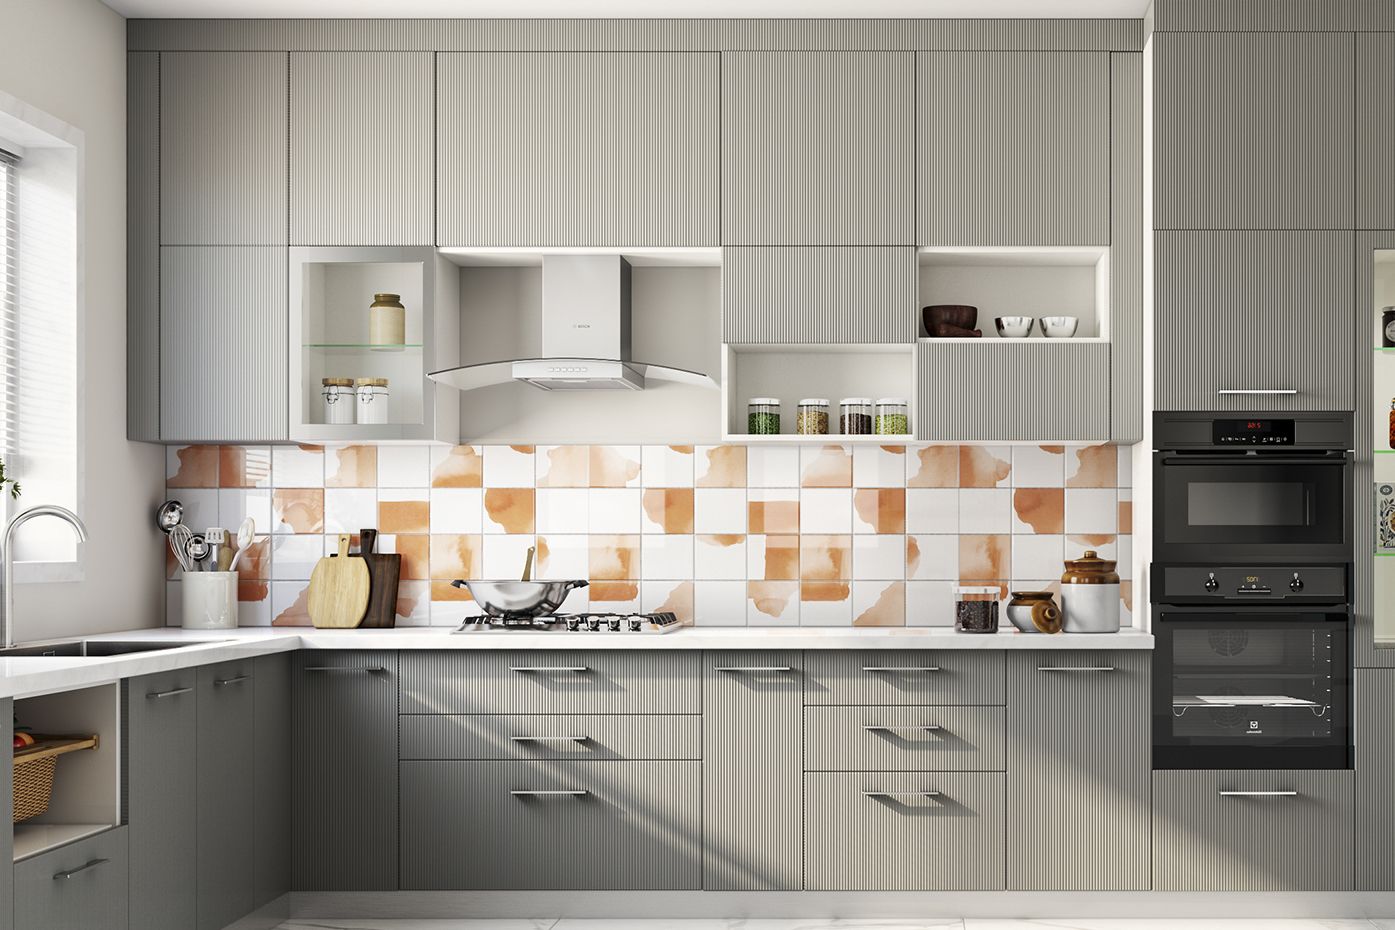 Contemporary Abstract Grid-Patterned Ceramic Wall Kitchen Tile Design